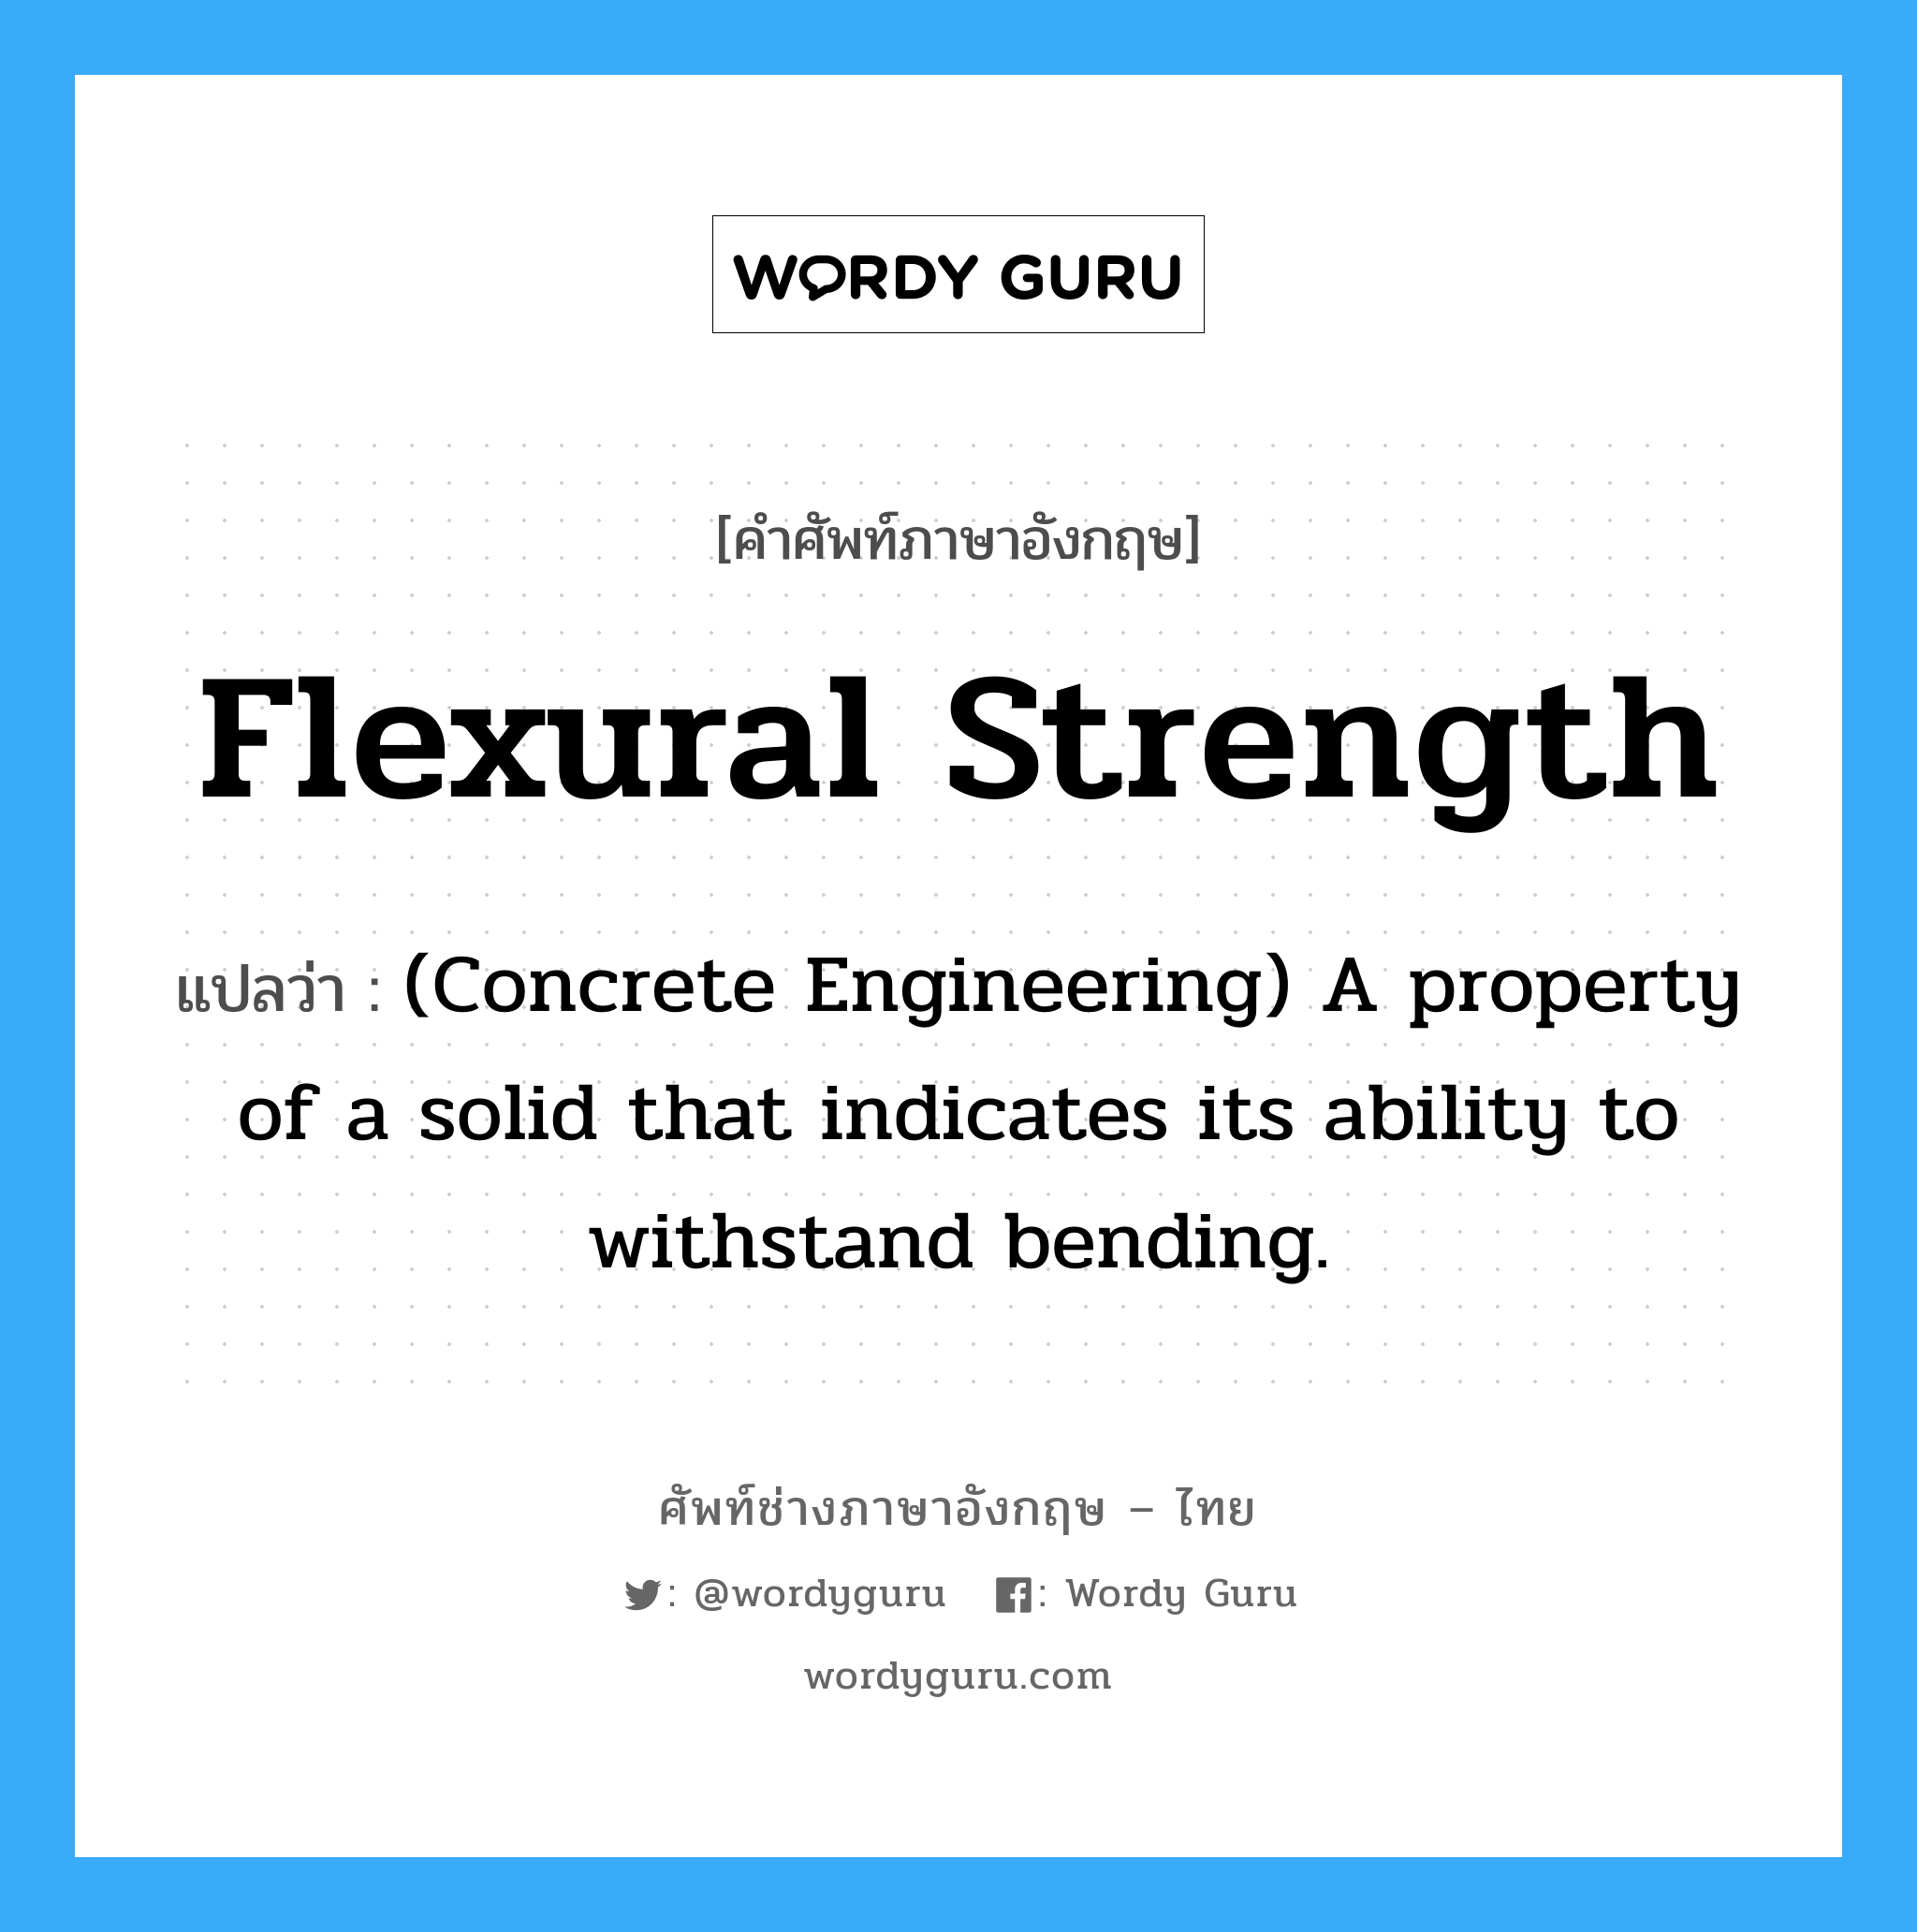 (Concrete Engineering) A property of a solid that indicates its ability to withstand bending. ภาษาอังกฤษ?, คำศัพท์ช่างภาษาอังกฤษ - ไทย (Concrete Engineering) A property of a solid that indicates its ability to withstand bending. คำศัพท์ภาษาอังกฤษ (Concrete Engineering) A property of a solid that indicates its ability to withstand bending. แปลว่า Flexural Strength